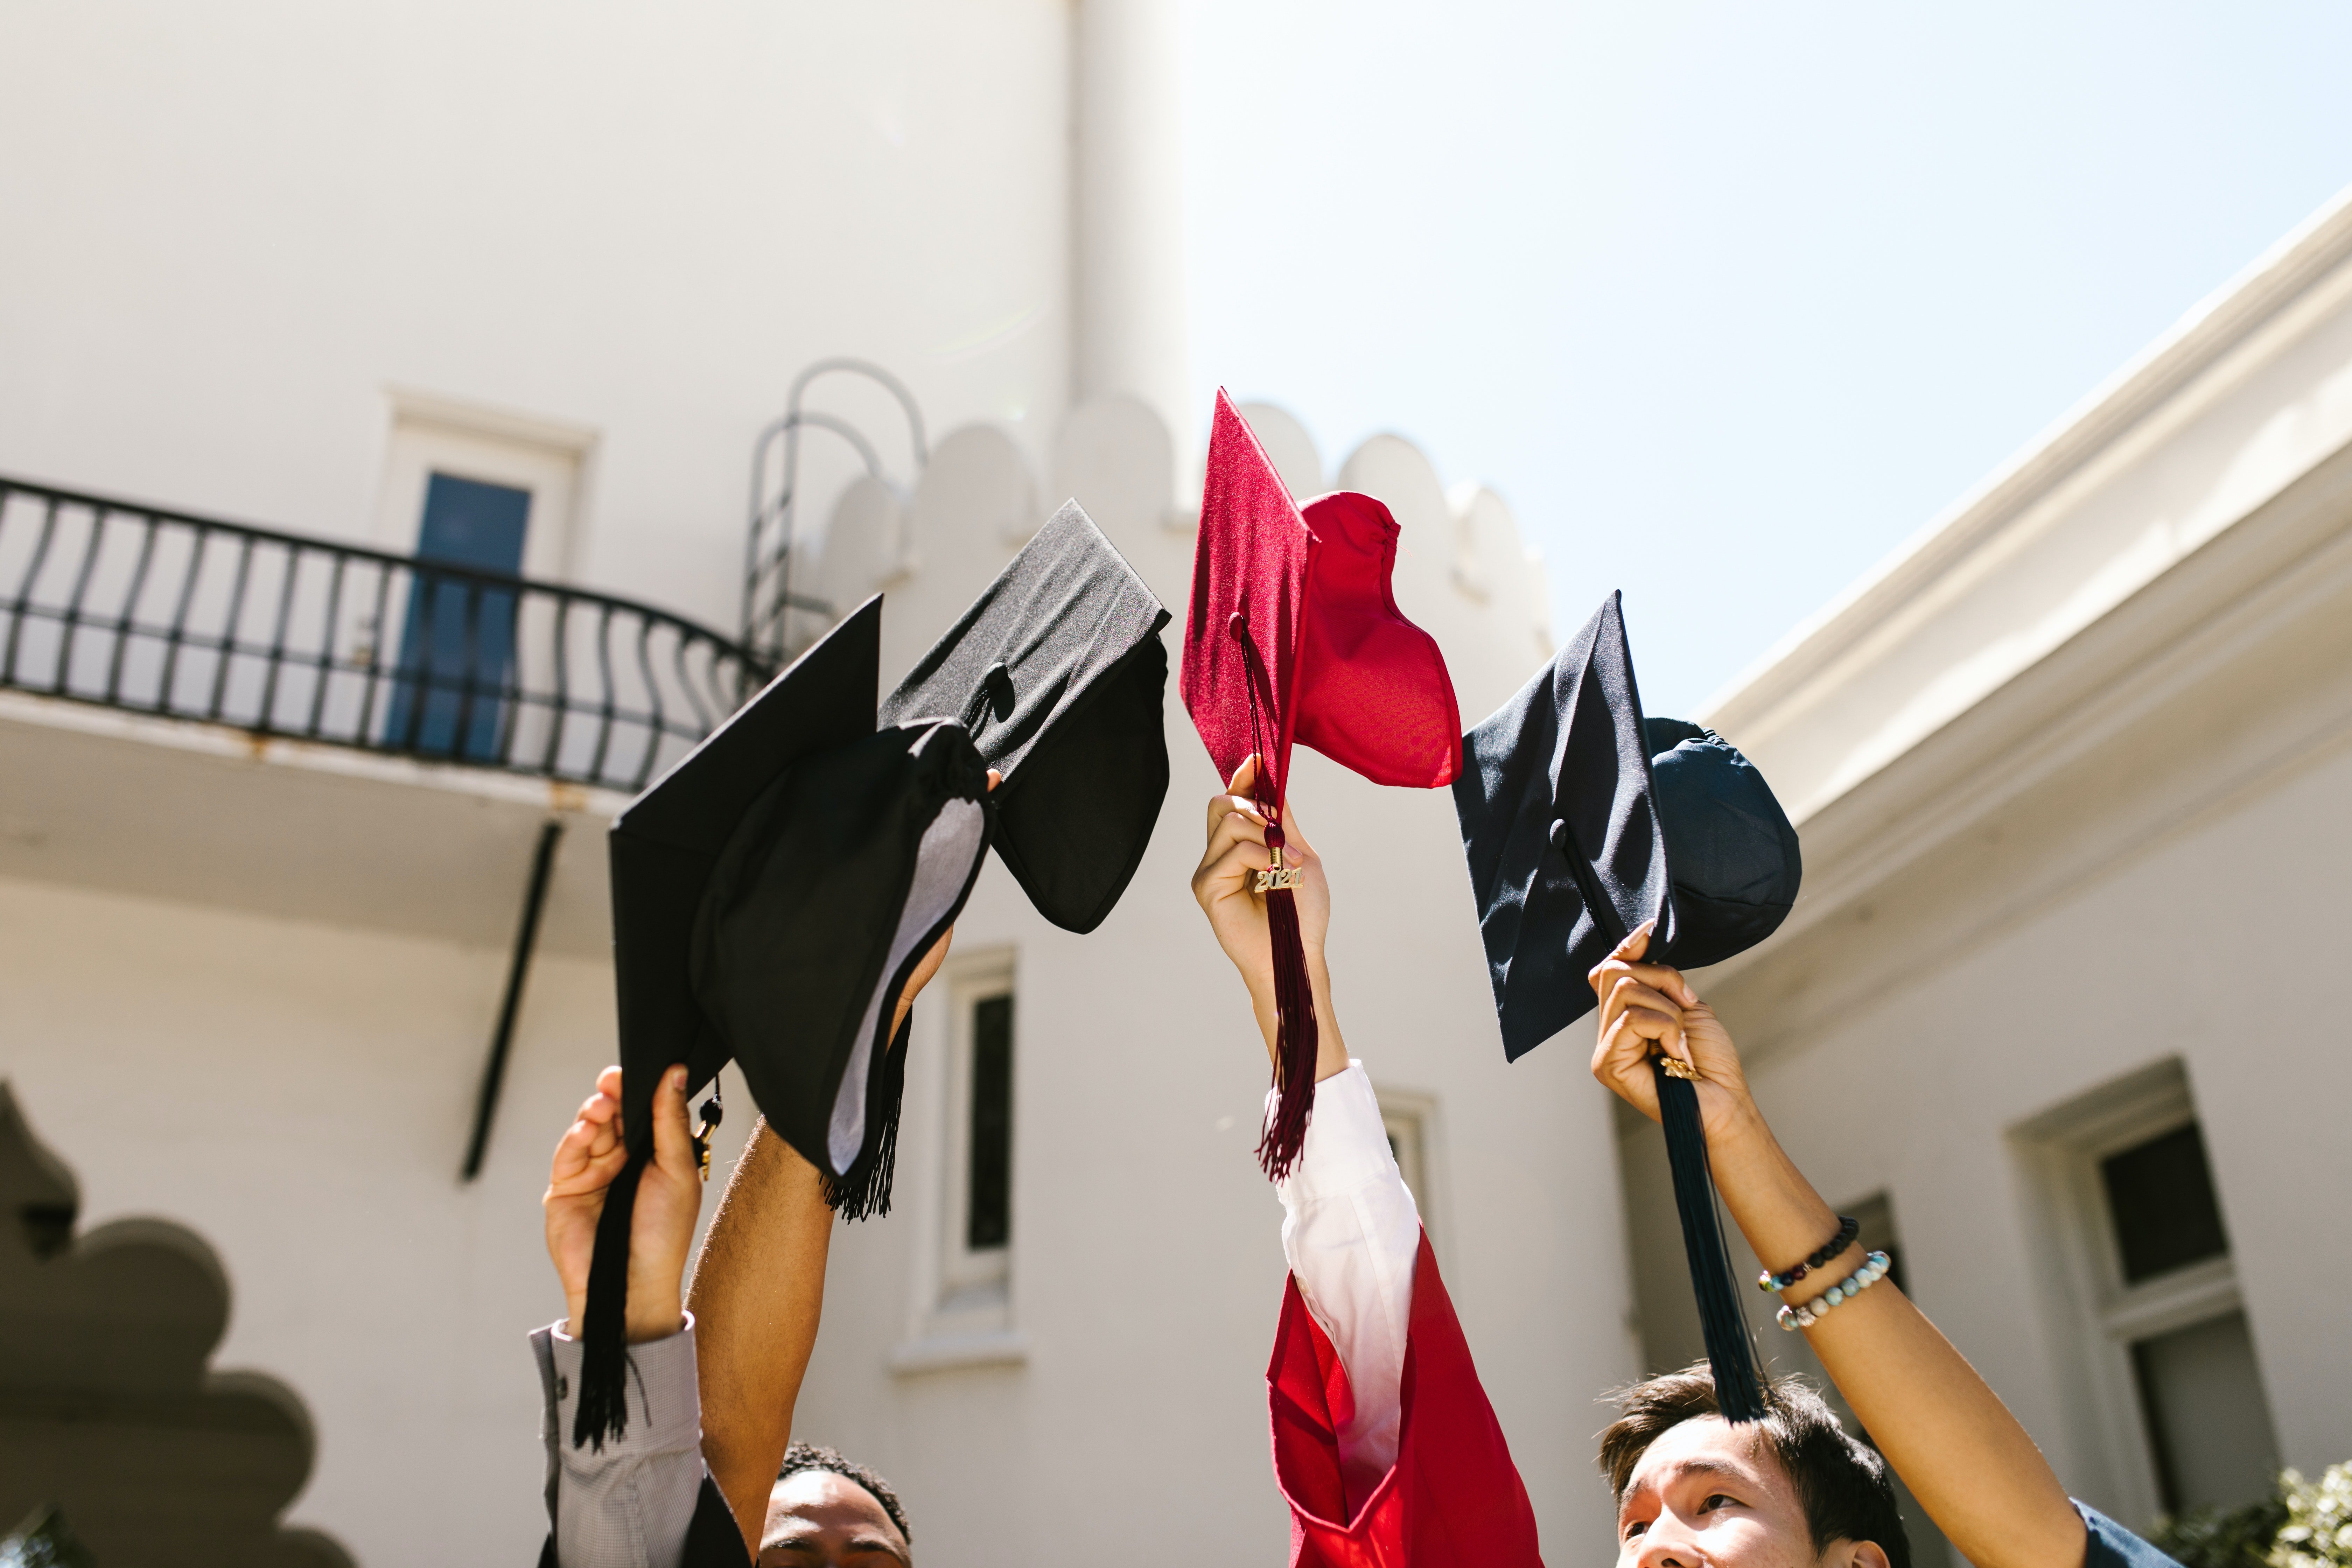 Graduating students holding up their caps. | Photo: Pexels